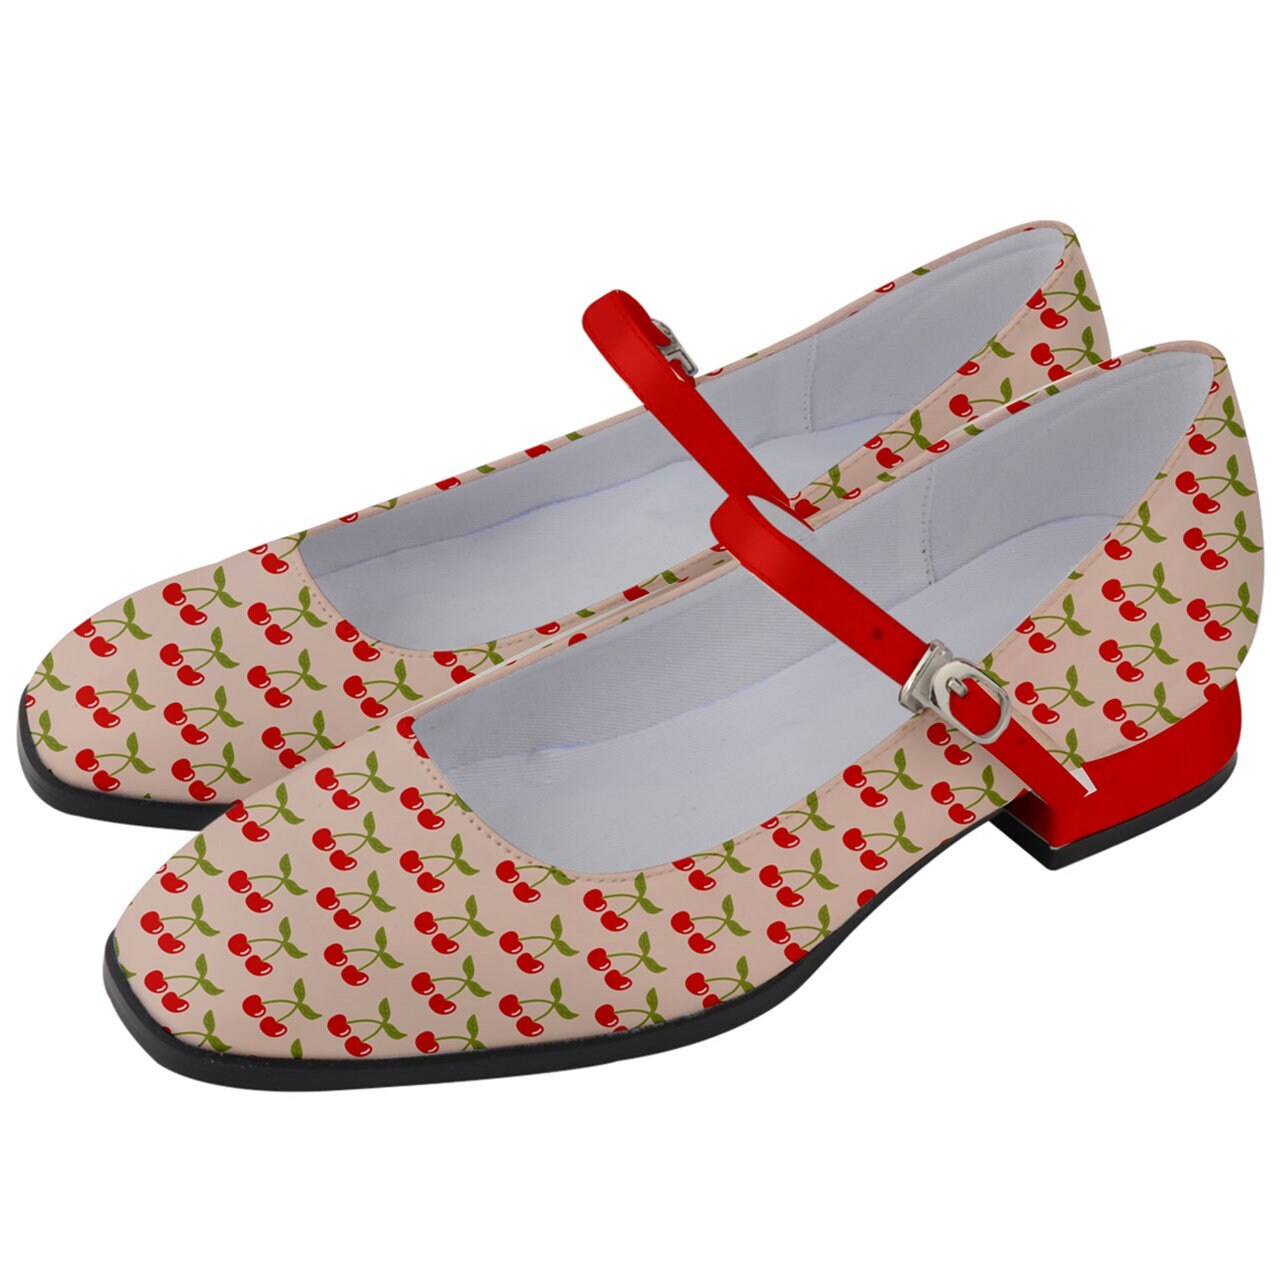 Mary Jane Shoes, Women's Mary Jane Shoes, Pin Up Shoes, Mary Jane Shoes Women, Cherry Shoes Women, Retro Shoes Women, Vintage Mary Jane